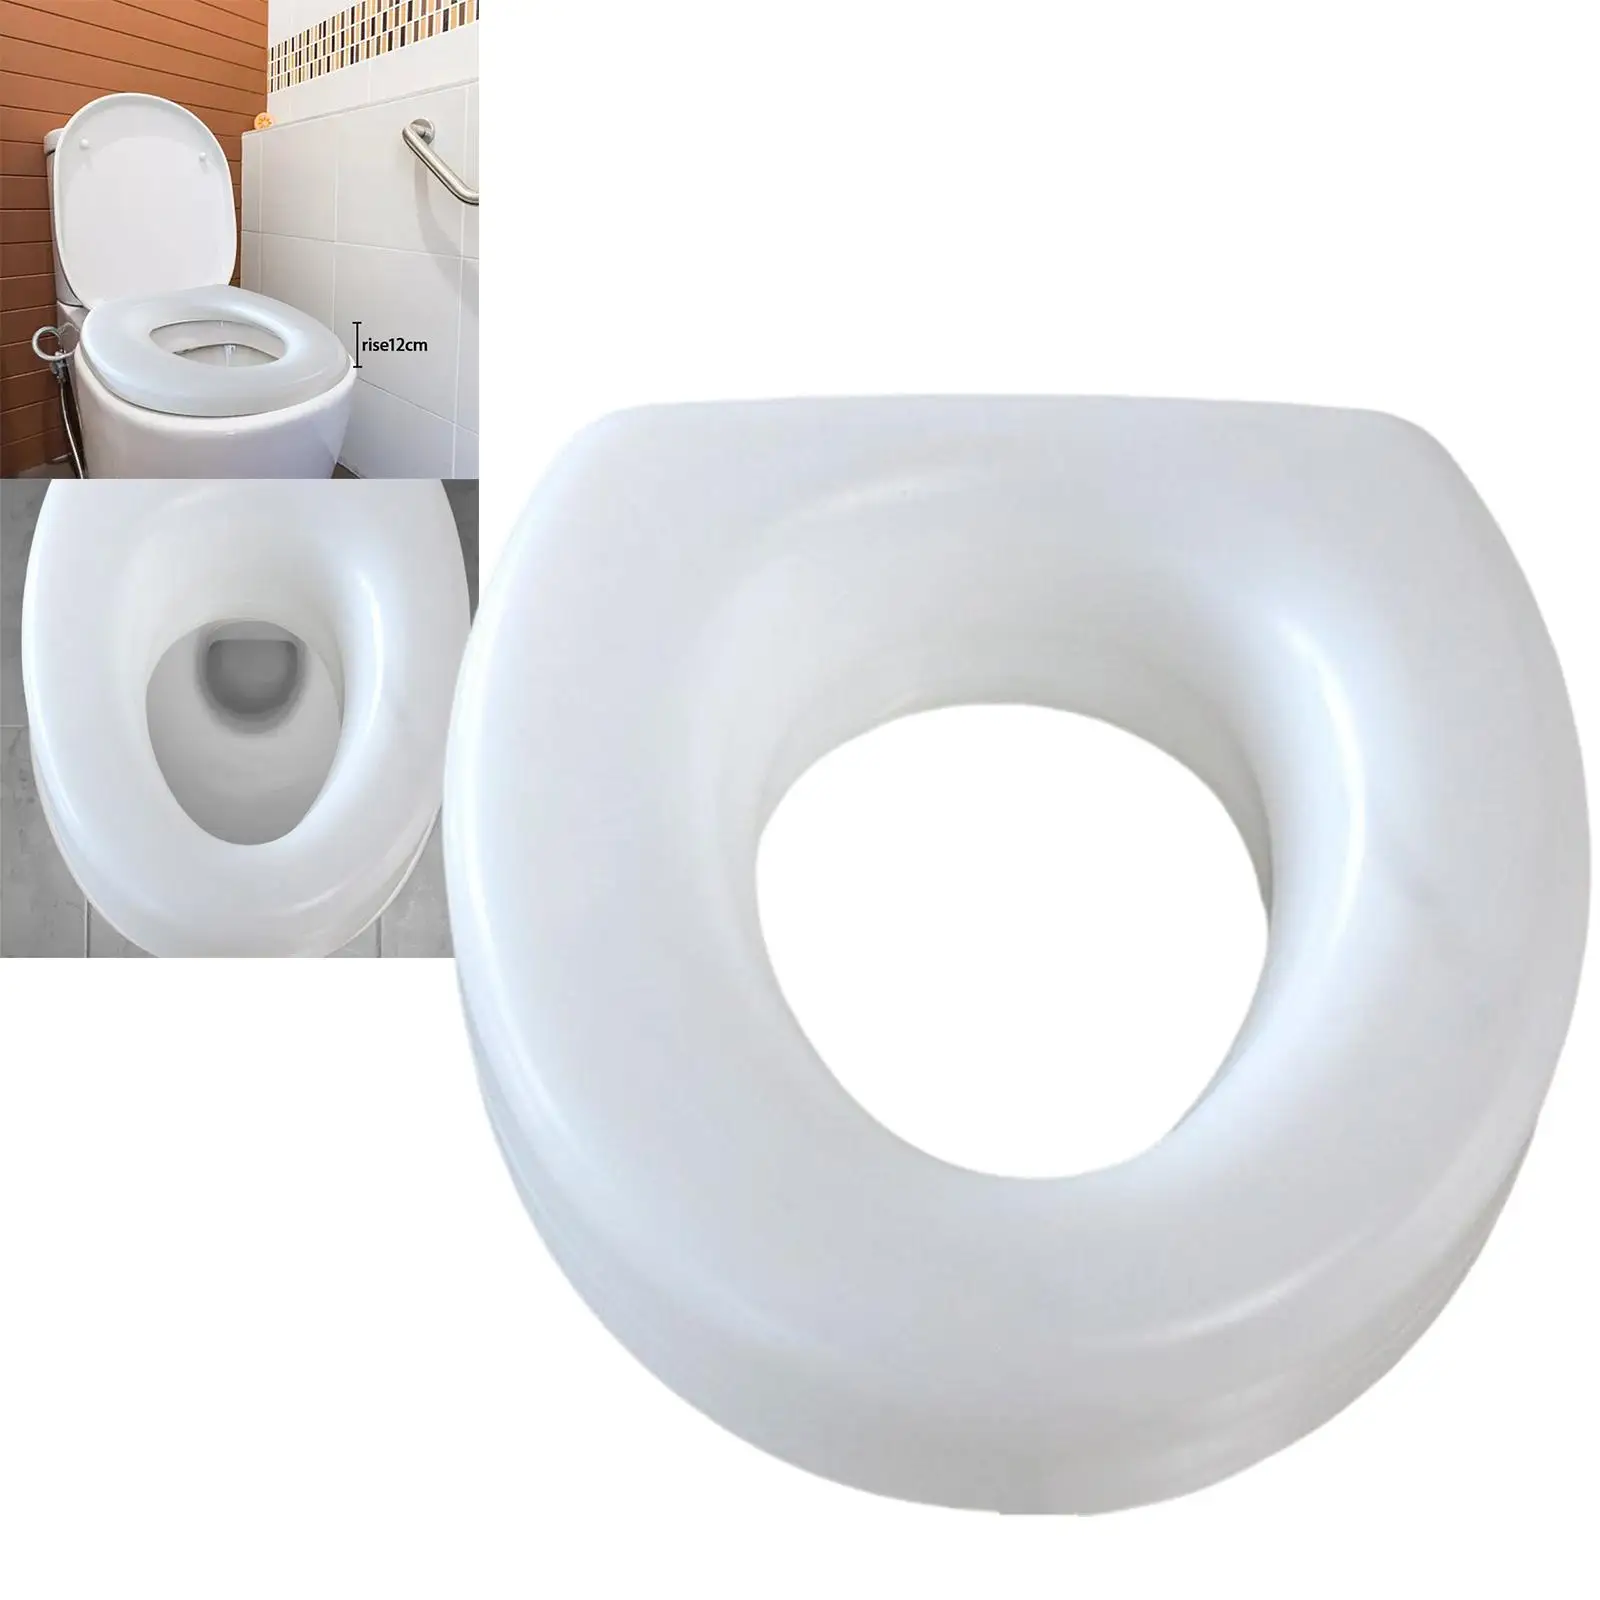 Raised Toilet Seat Assist Device Adjustable for Disabled Accessories  Durable Adds 4.7inch to Toilet Height 